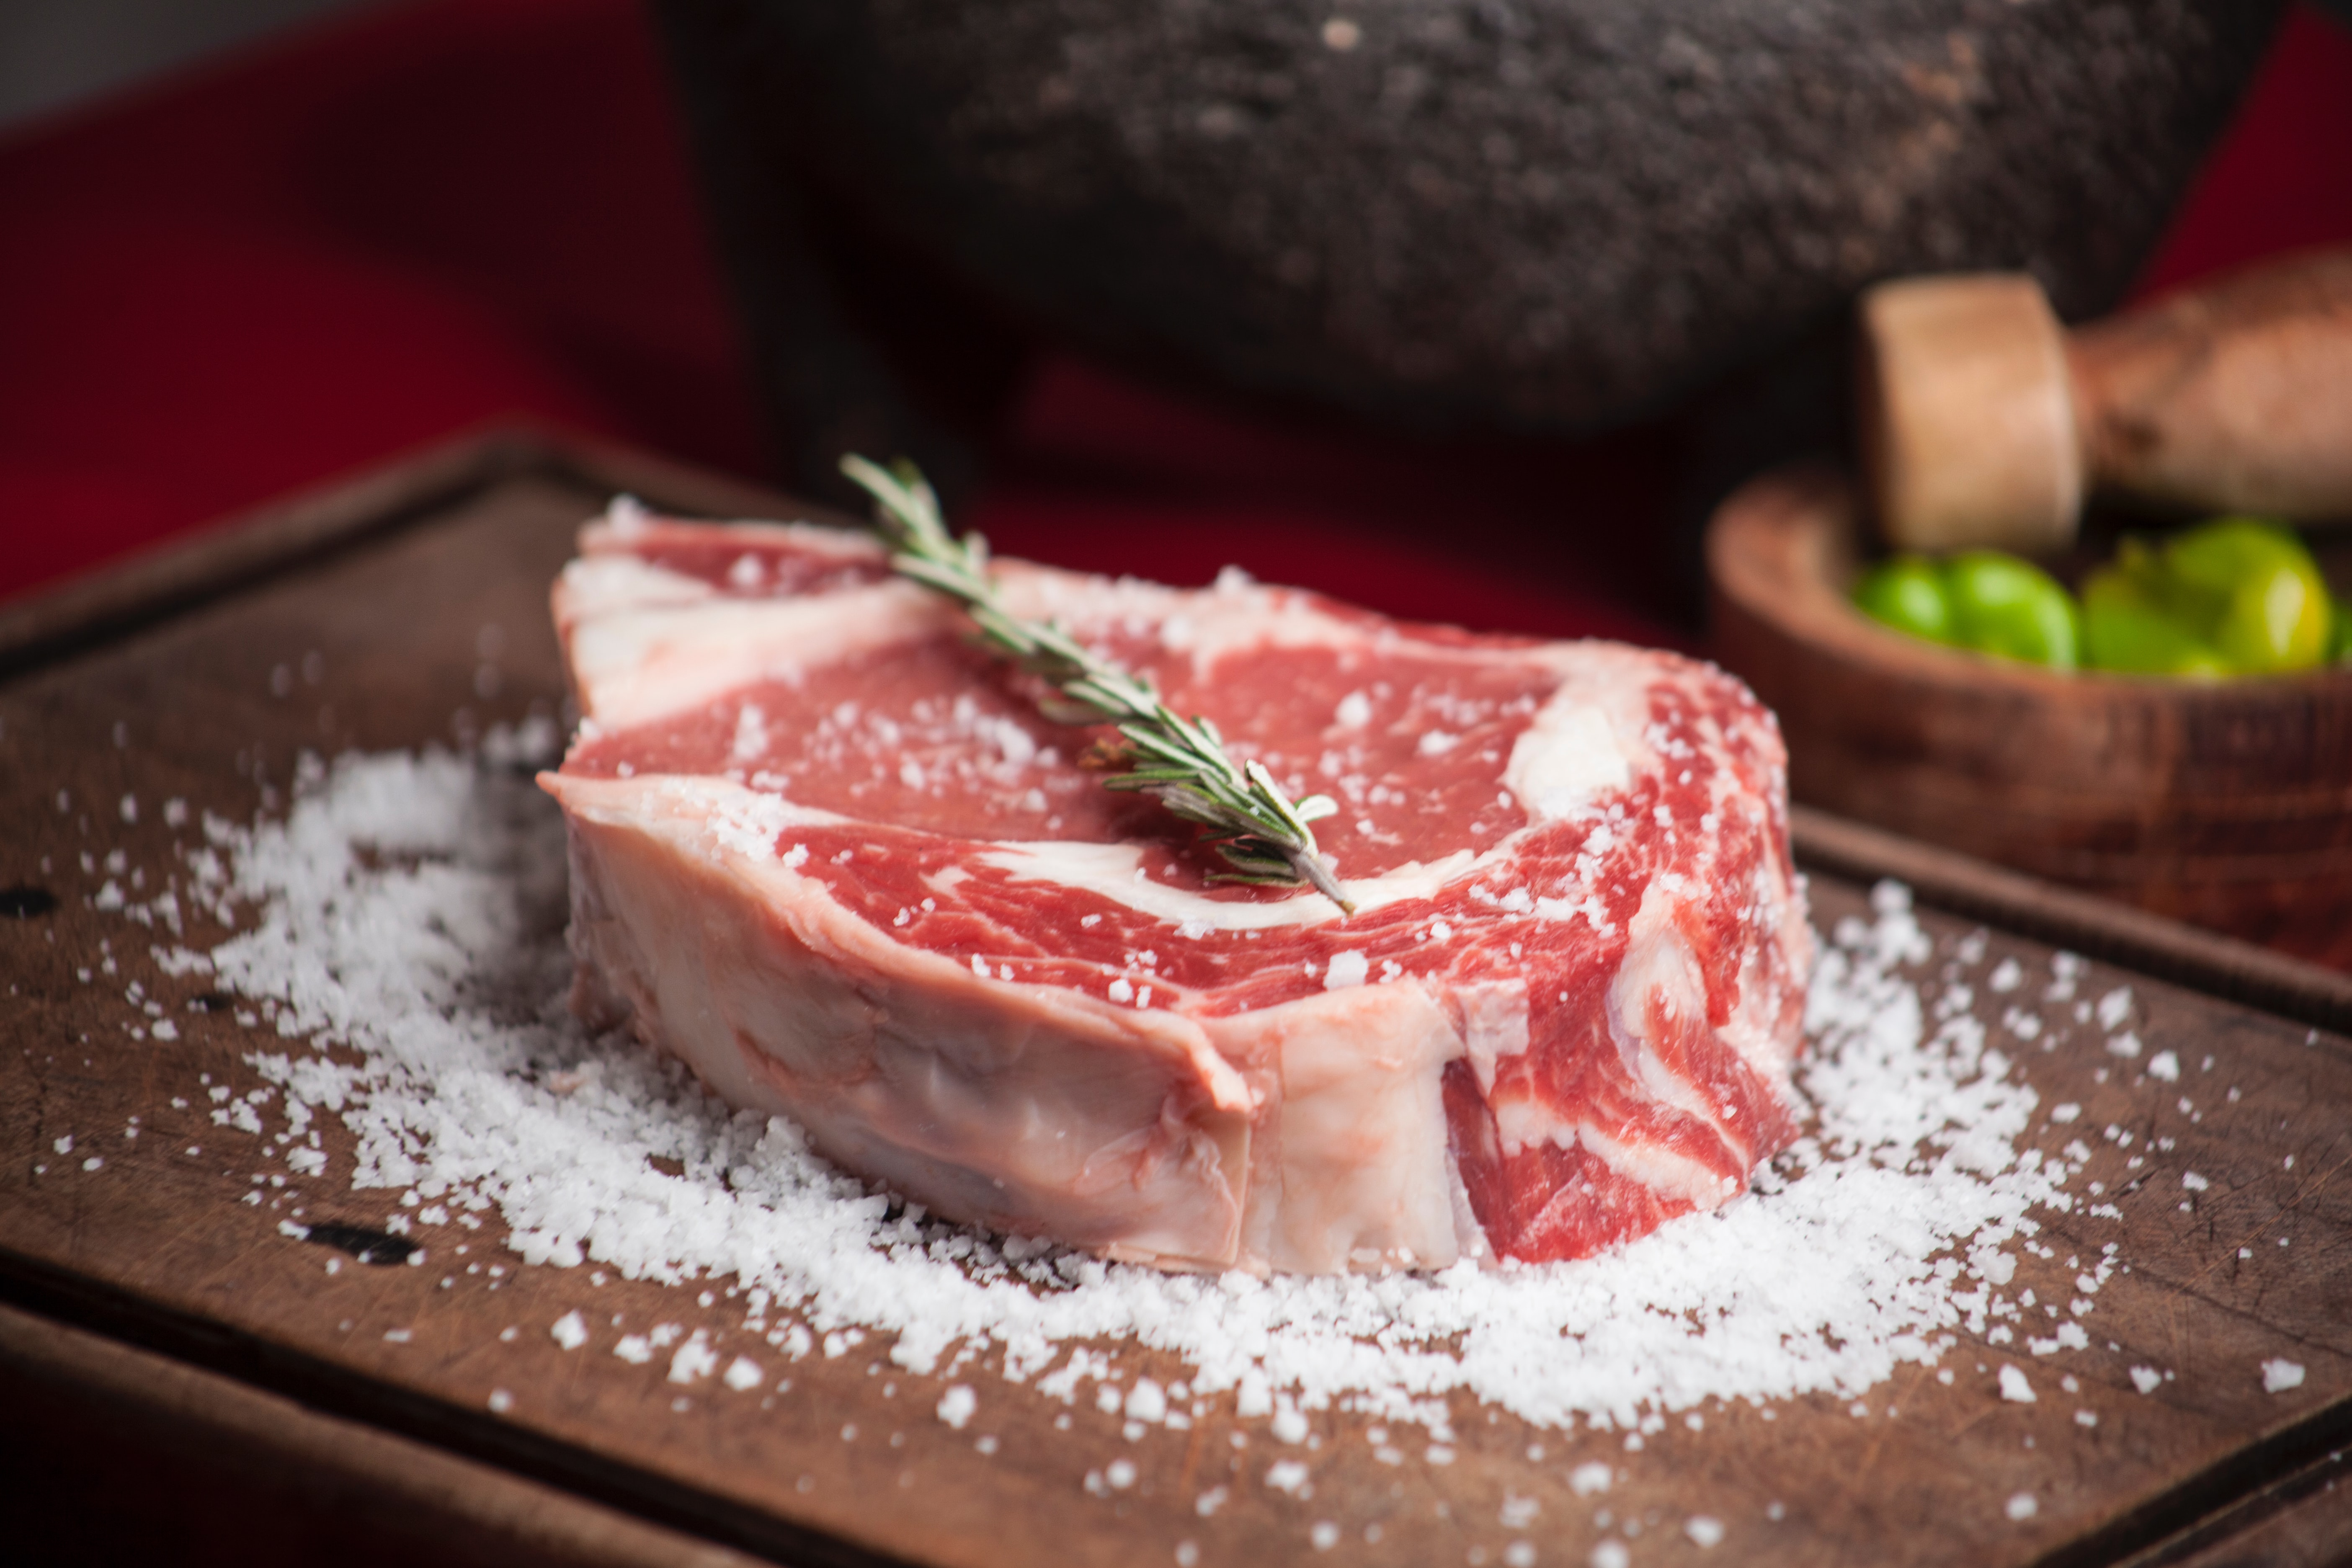 Red meat changes gut makeup, increasing heart disease risk MORE than saturated fat